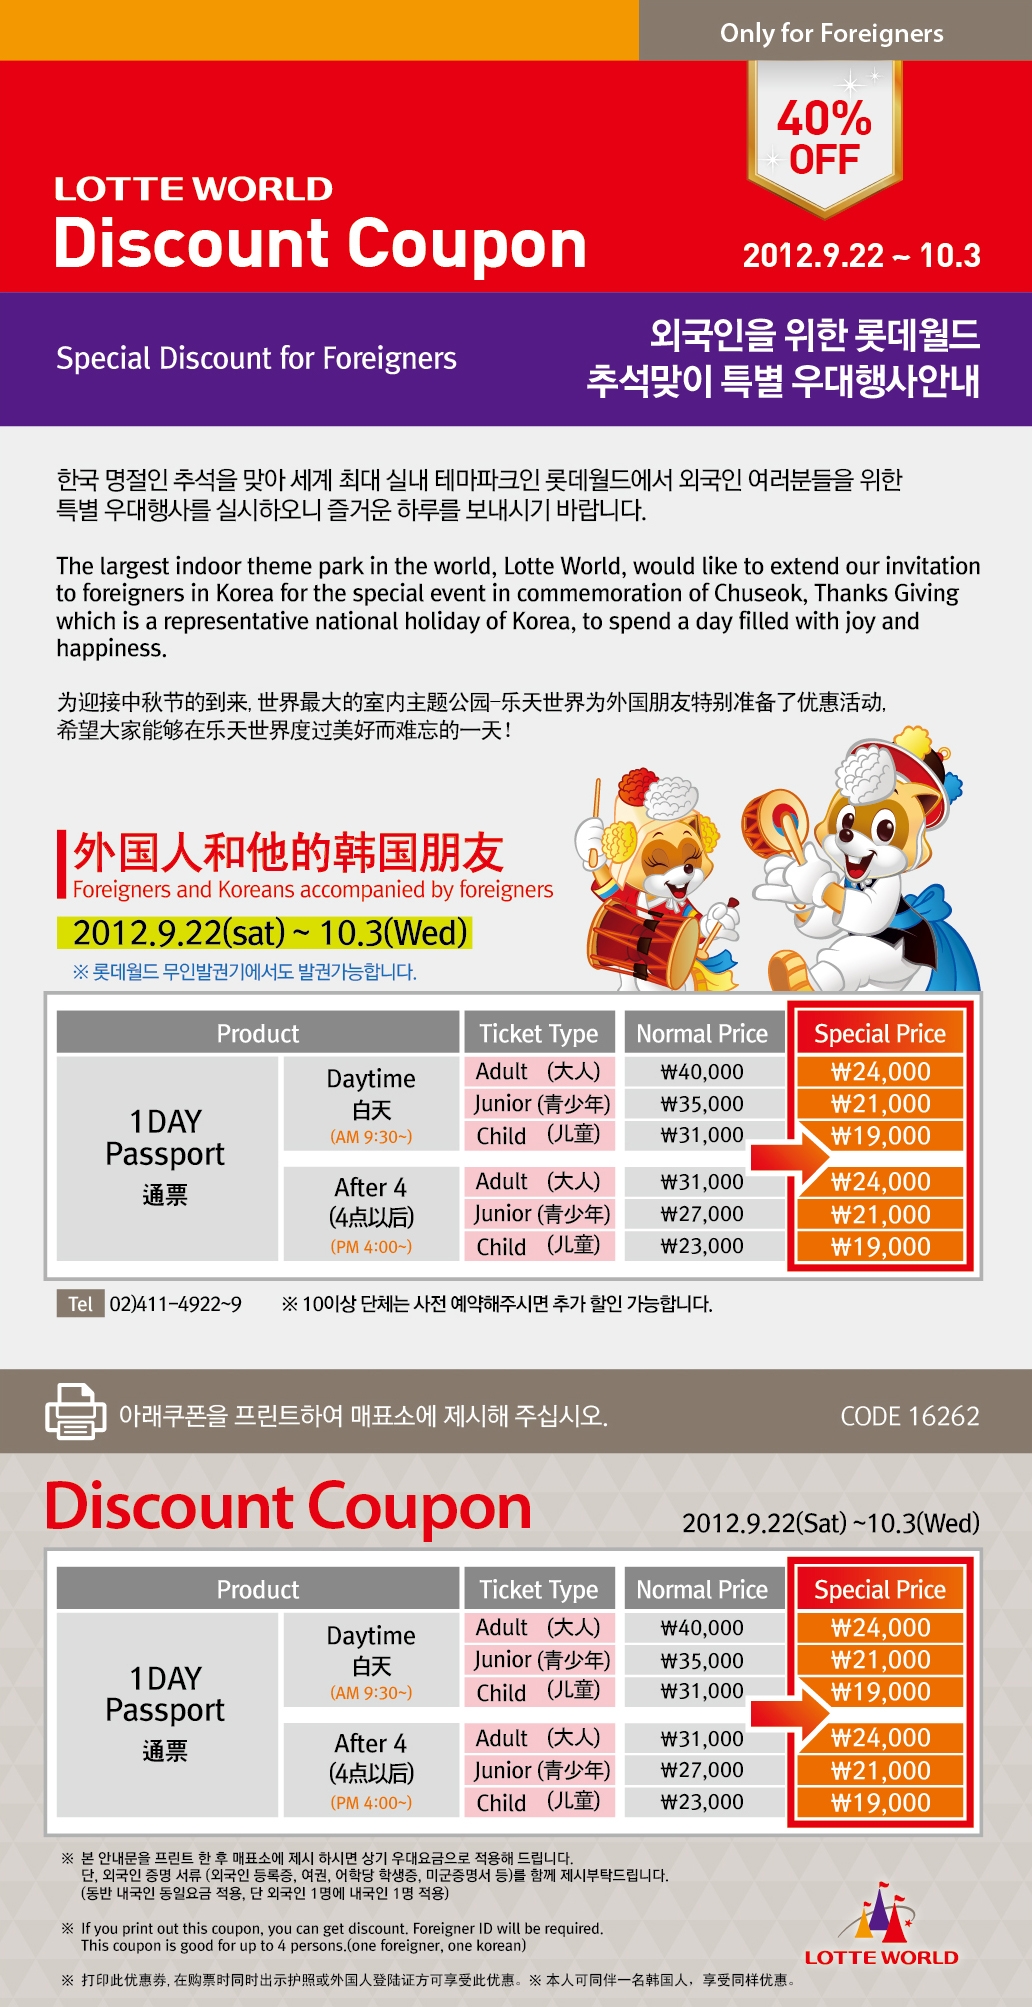 Chuseok Holiday Special Discount at Lotte World